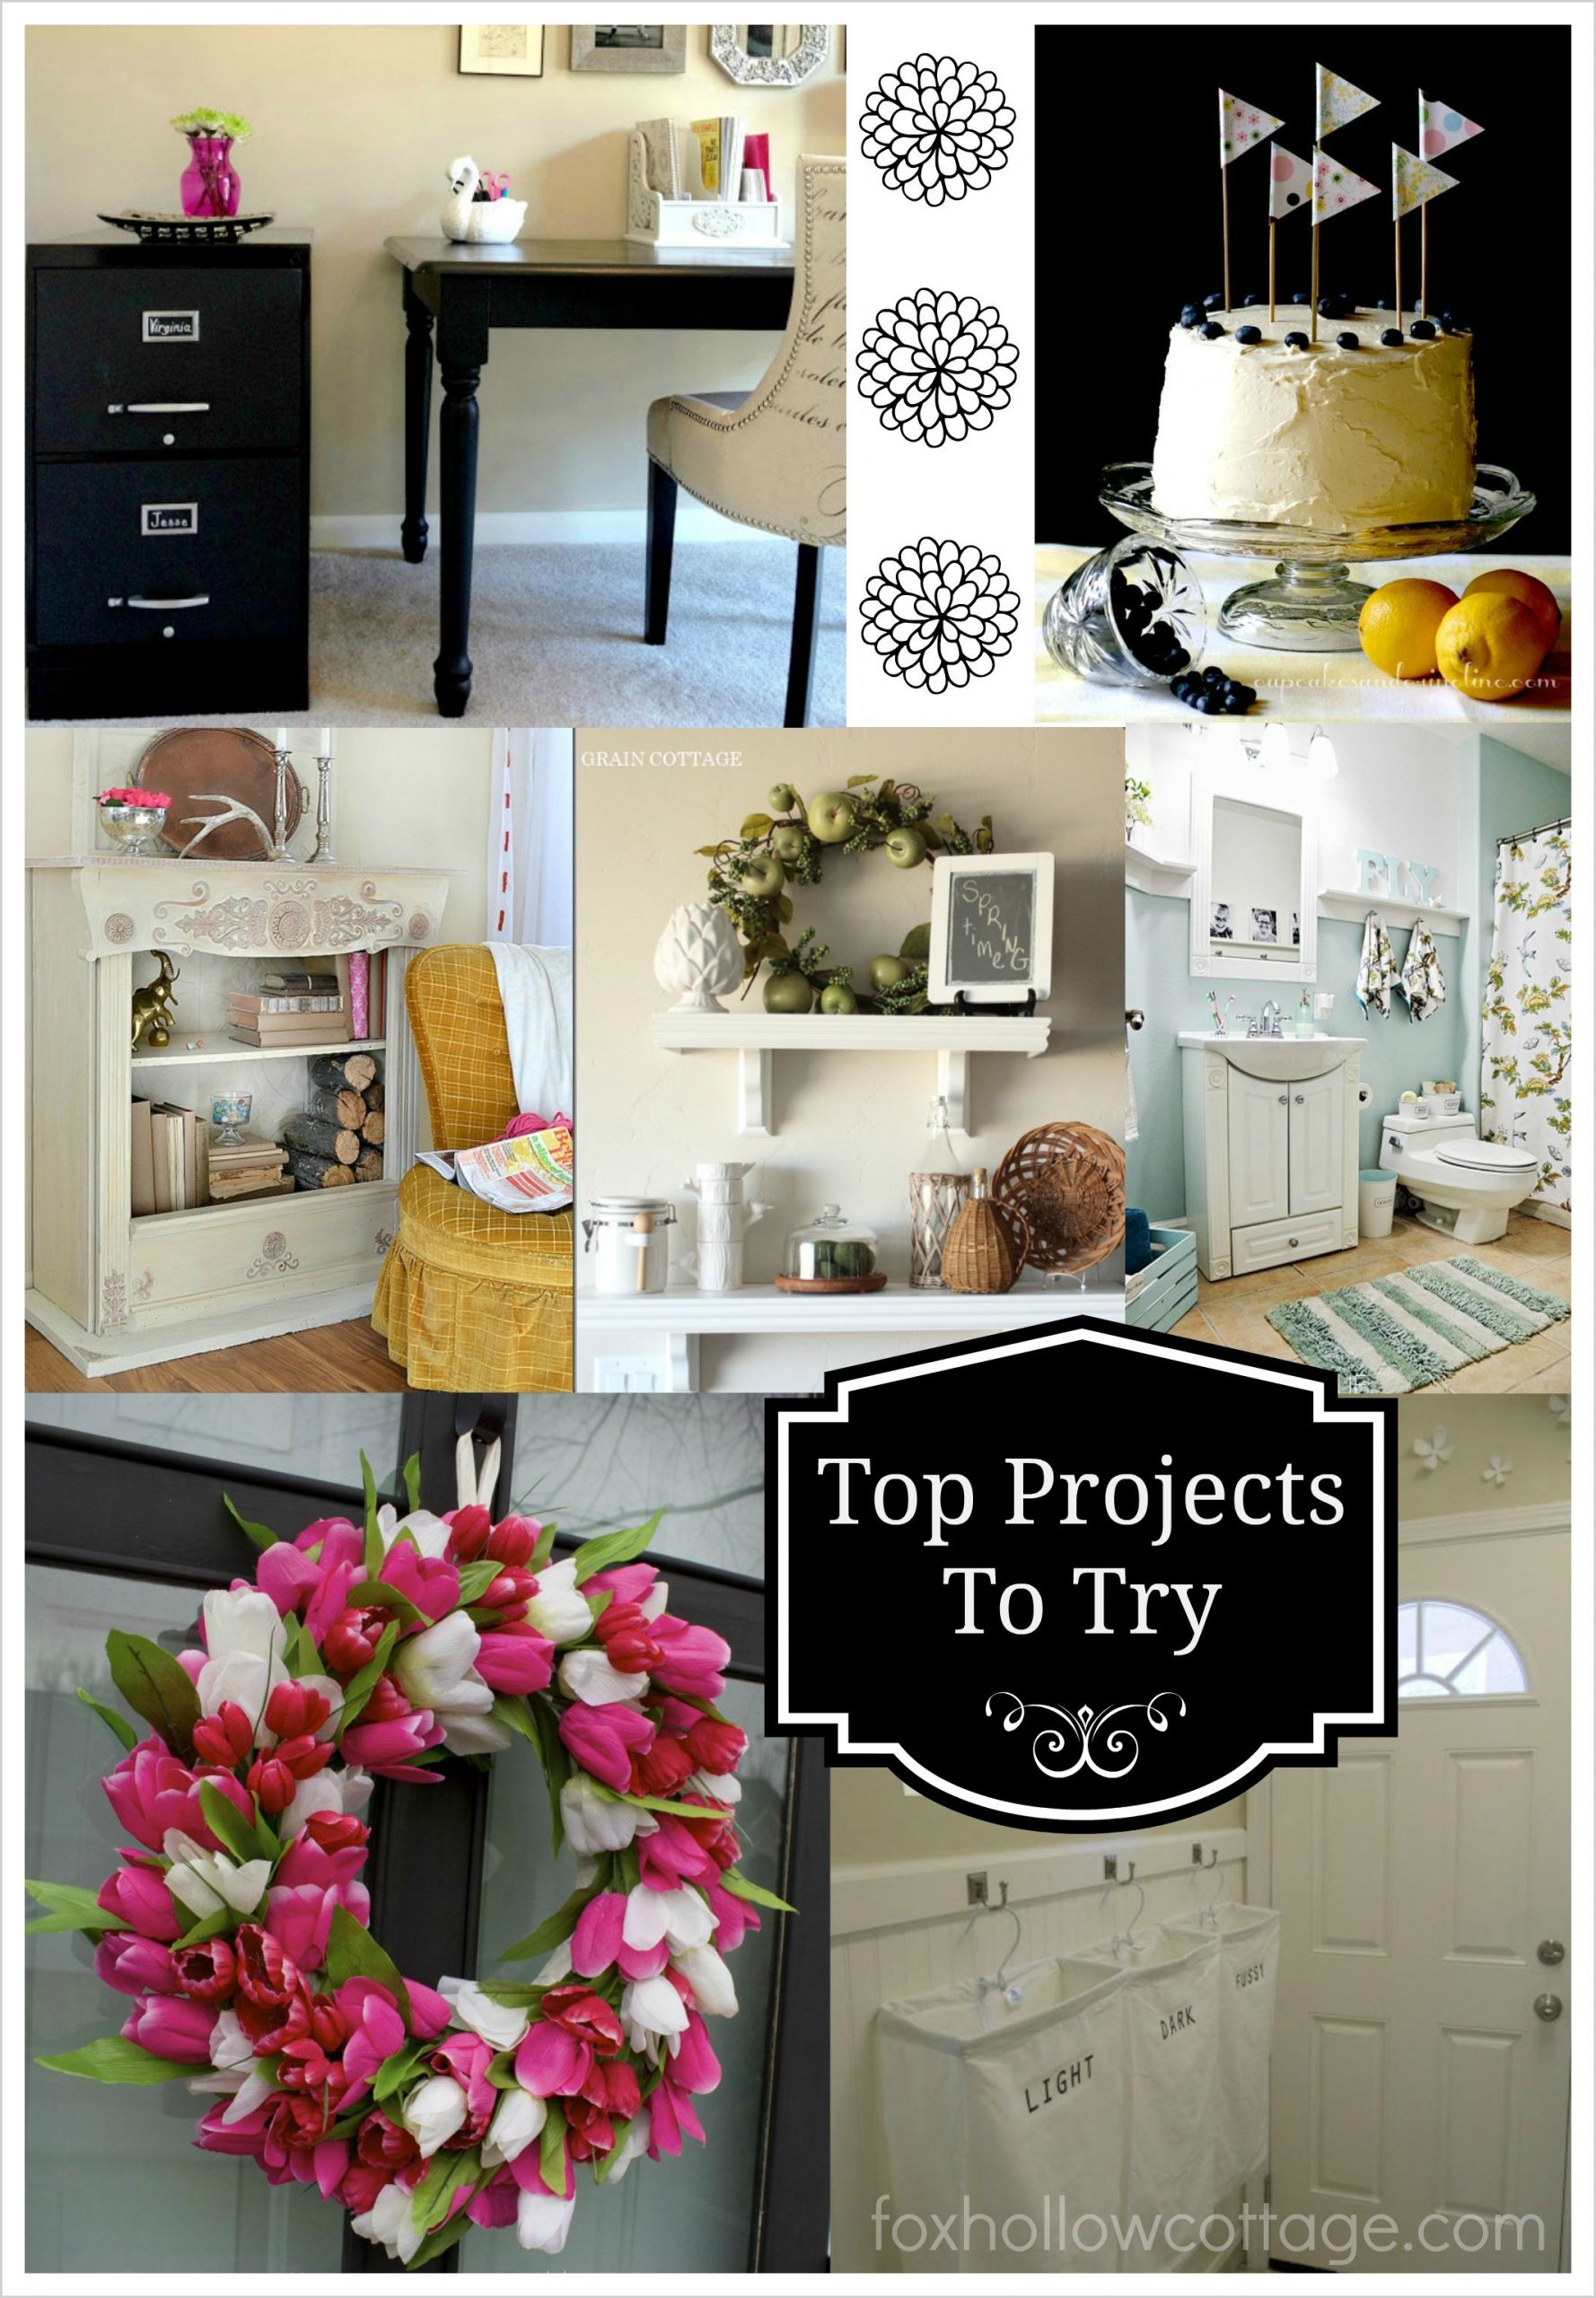 DIY Blog Home Decor
 Power Pinterest Link Party and Friday Fav Features 